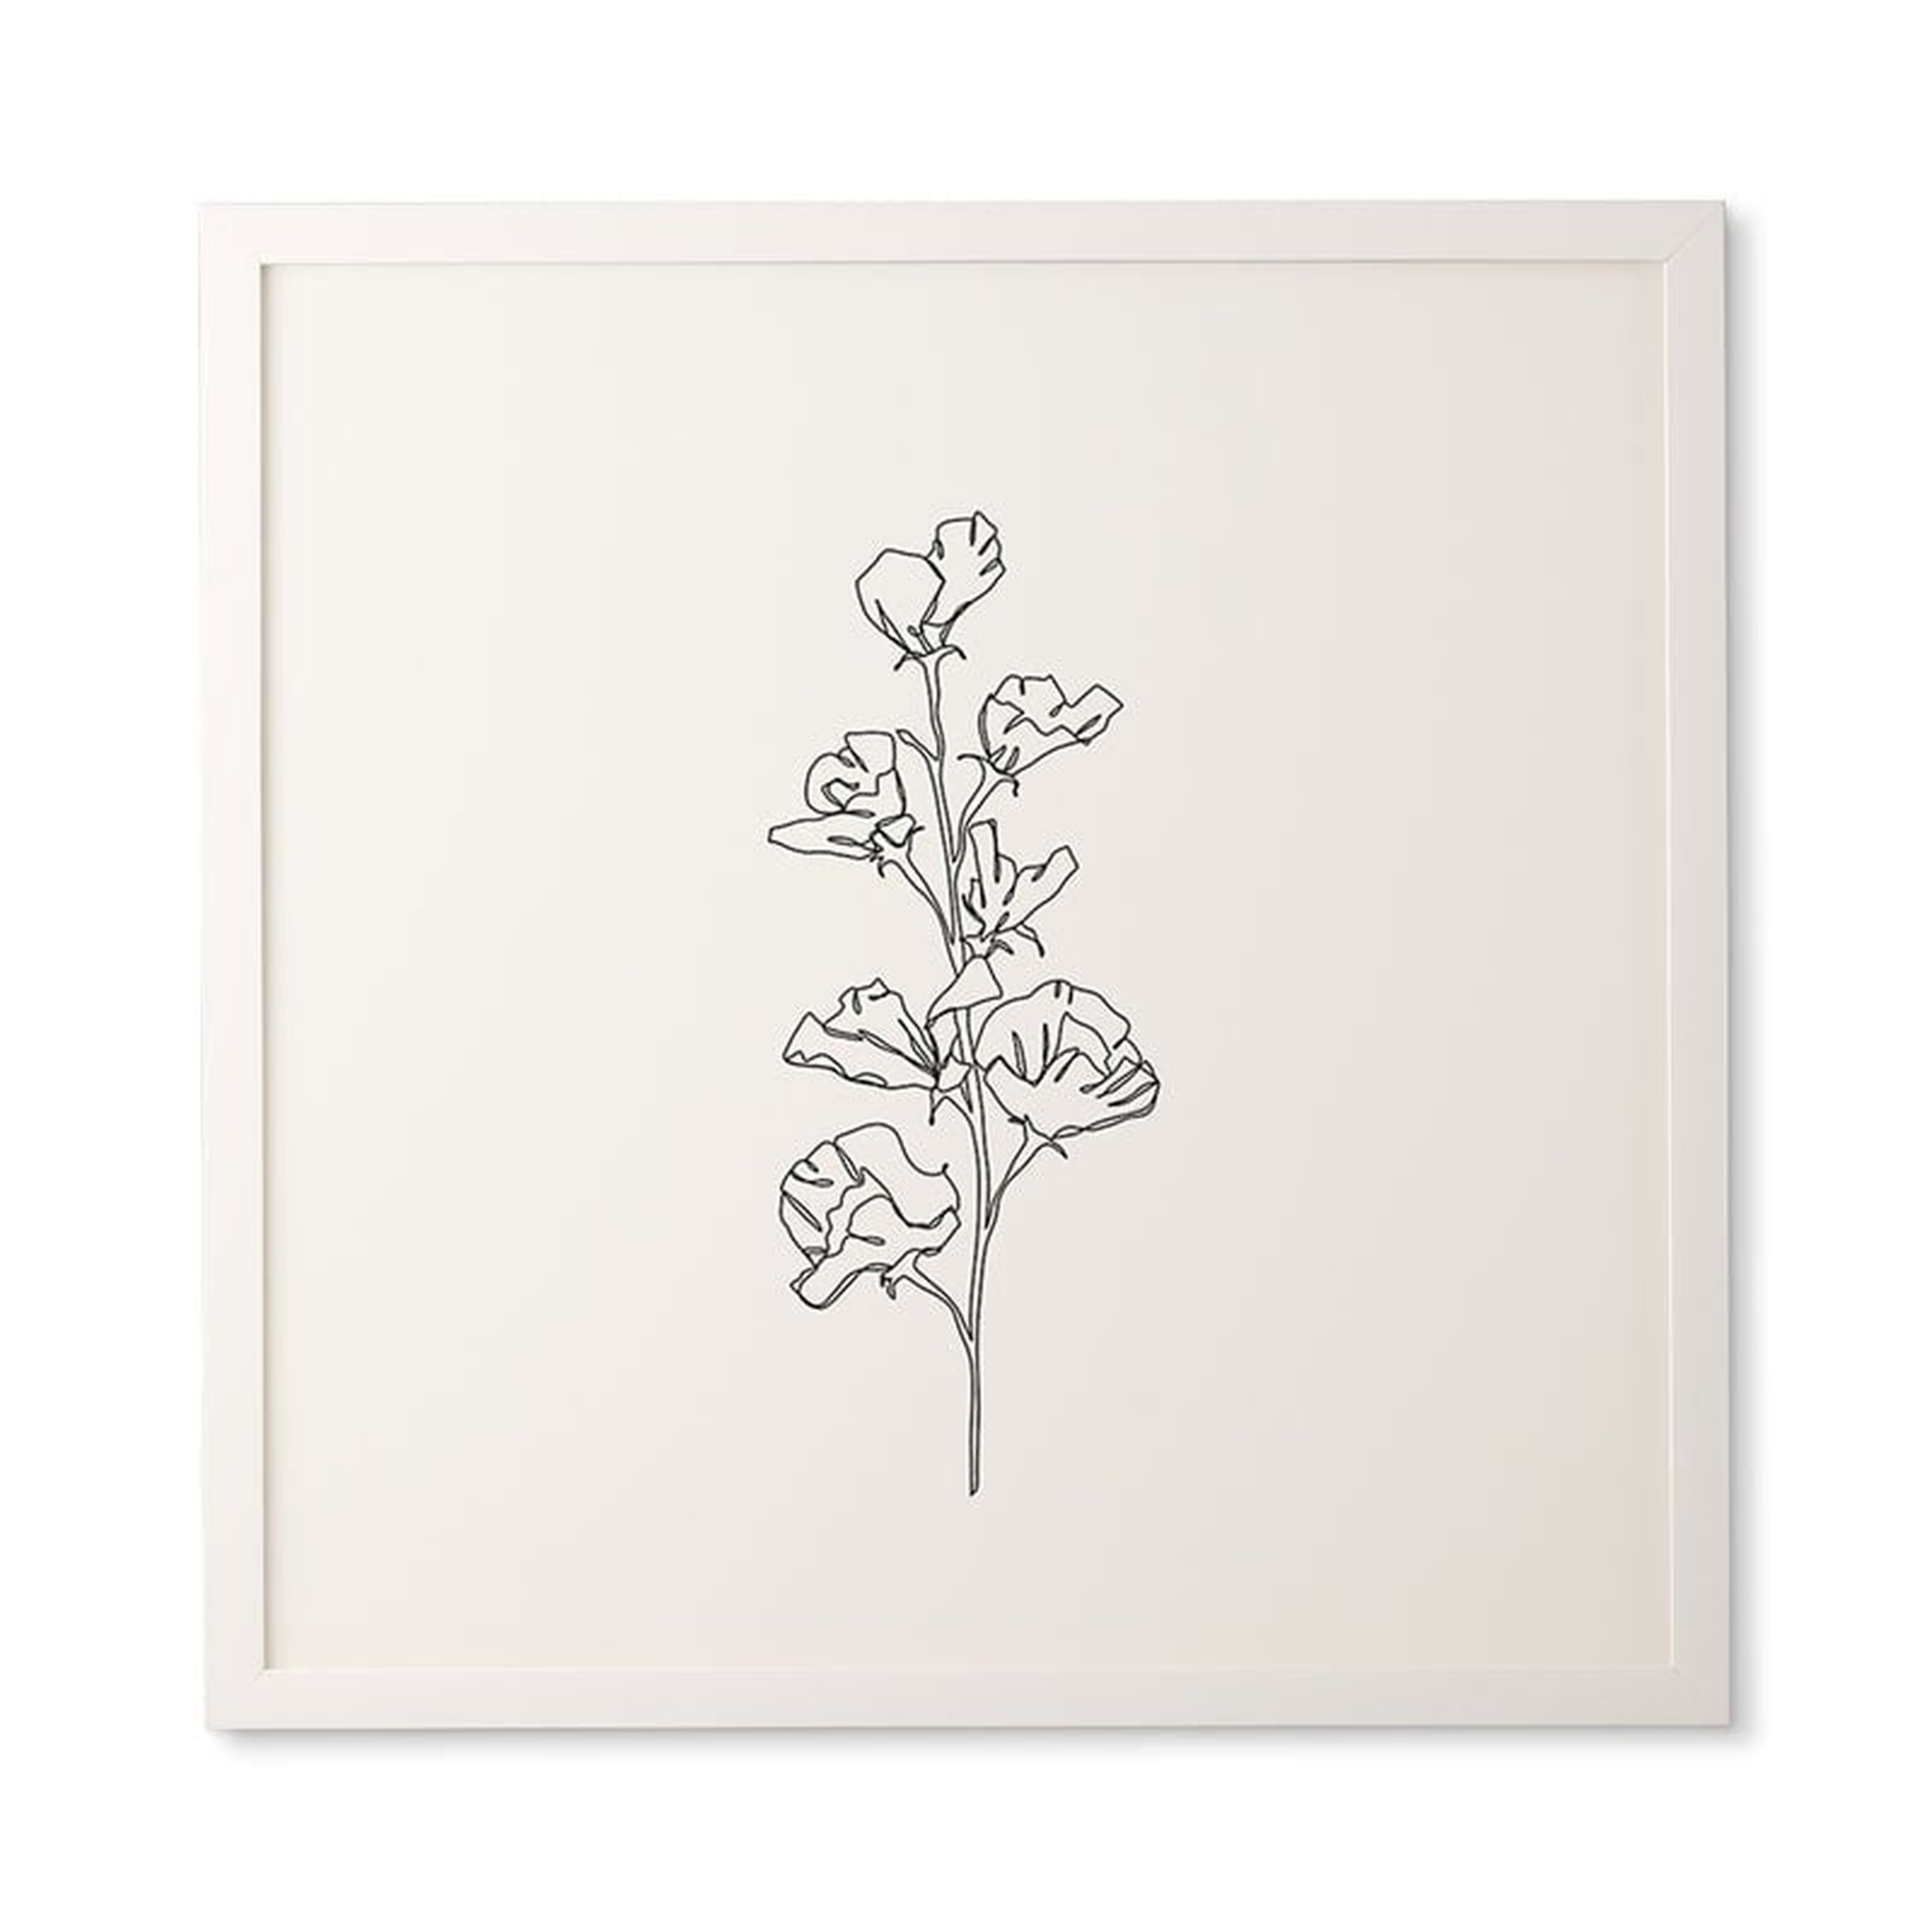 FRAMED WALL ART COTTON FLOWER ILLUSTRATION  BY THE COLOUR STUDY - Wander Print Co.